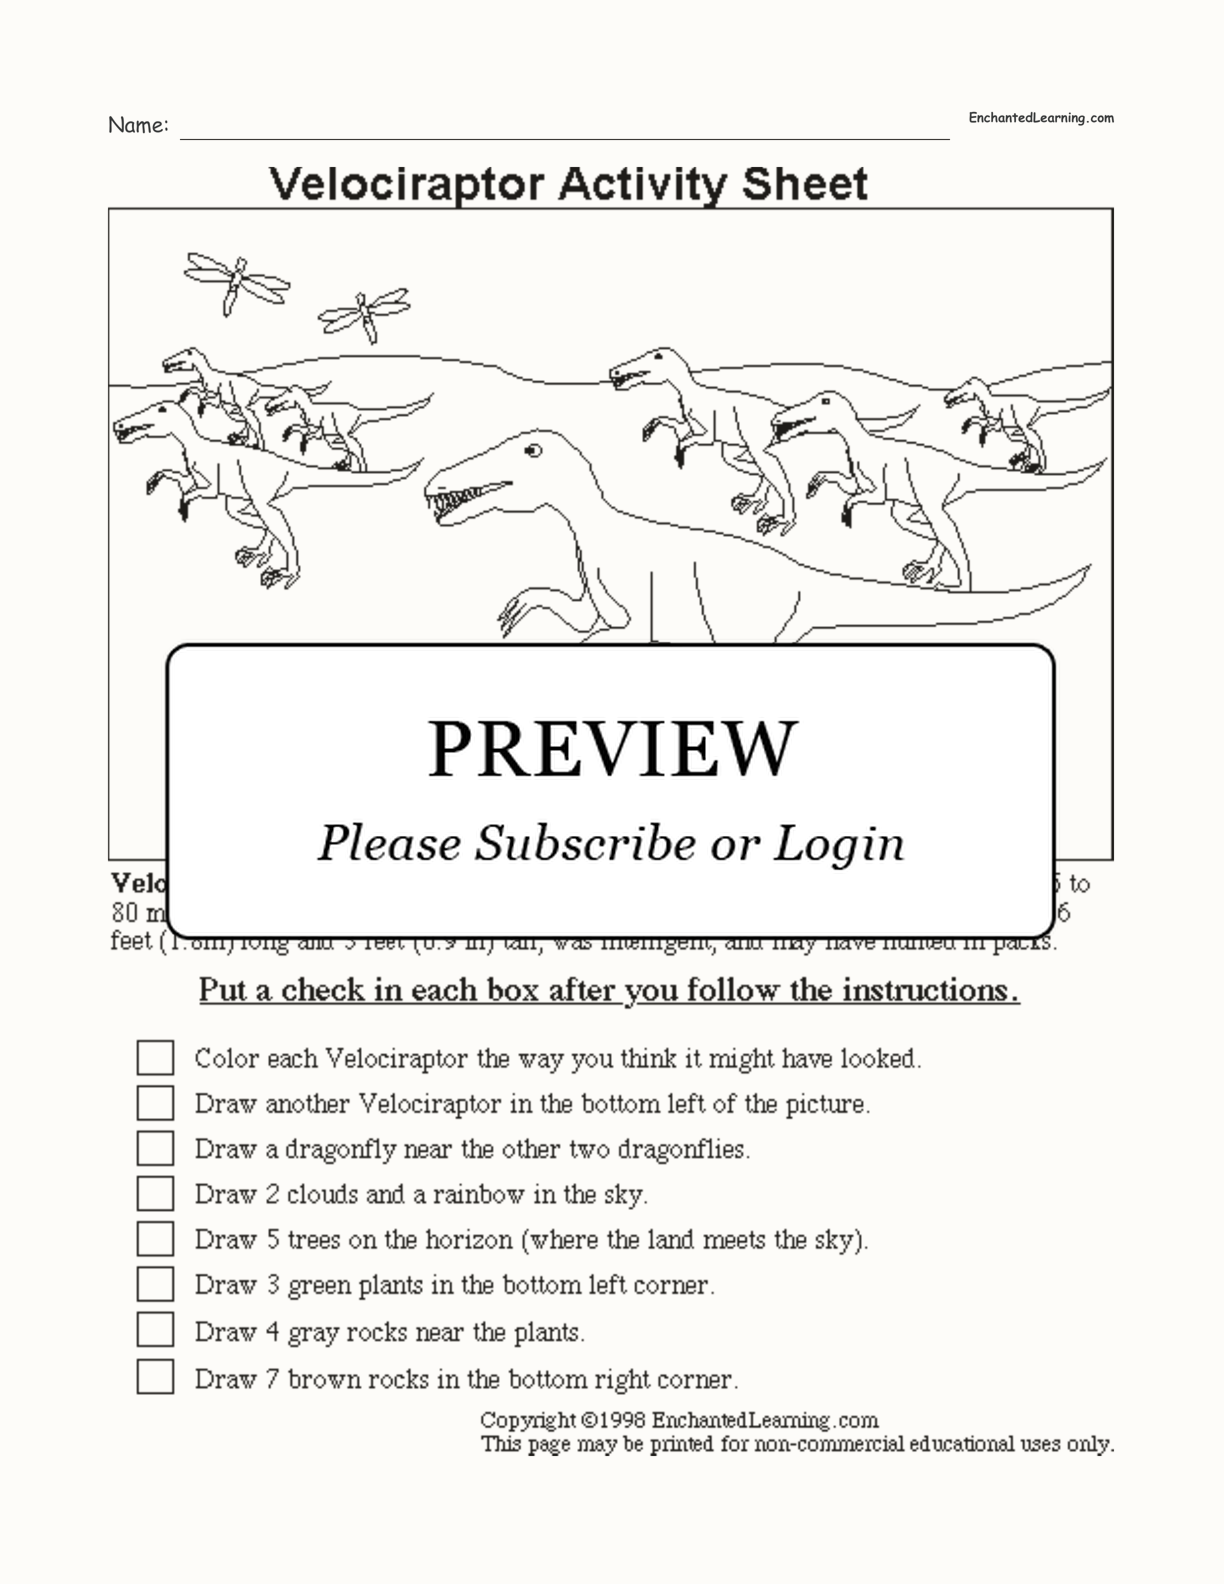 Velociraptor Follow the Instructions Worksheet interactive printout page 1